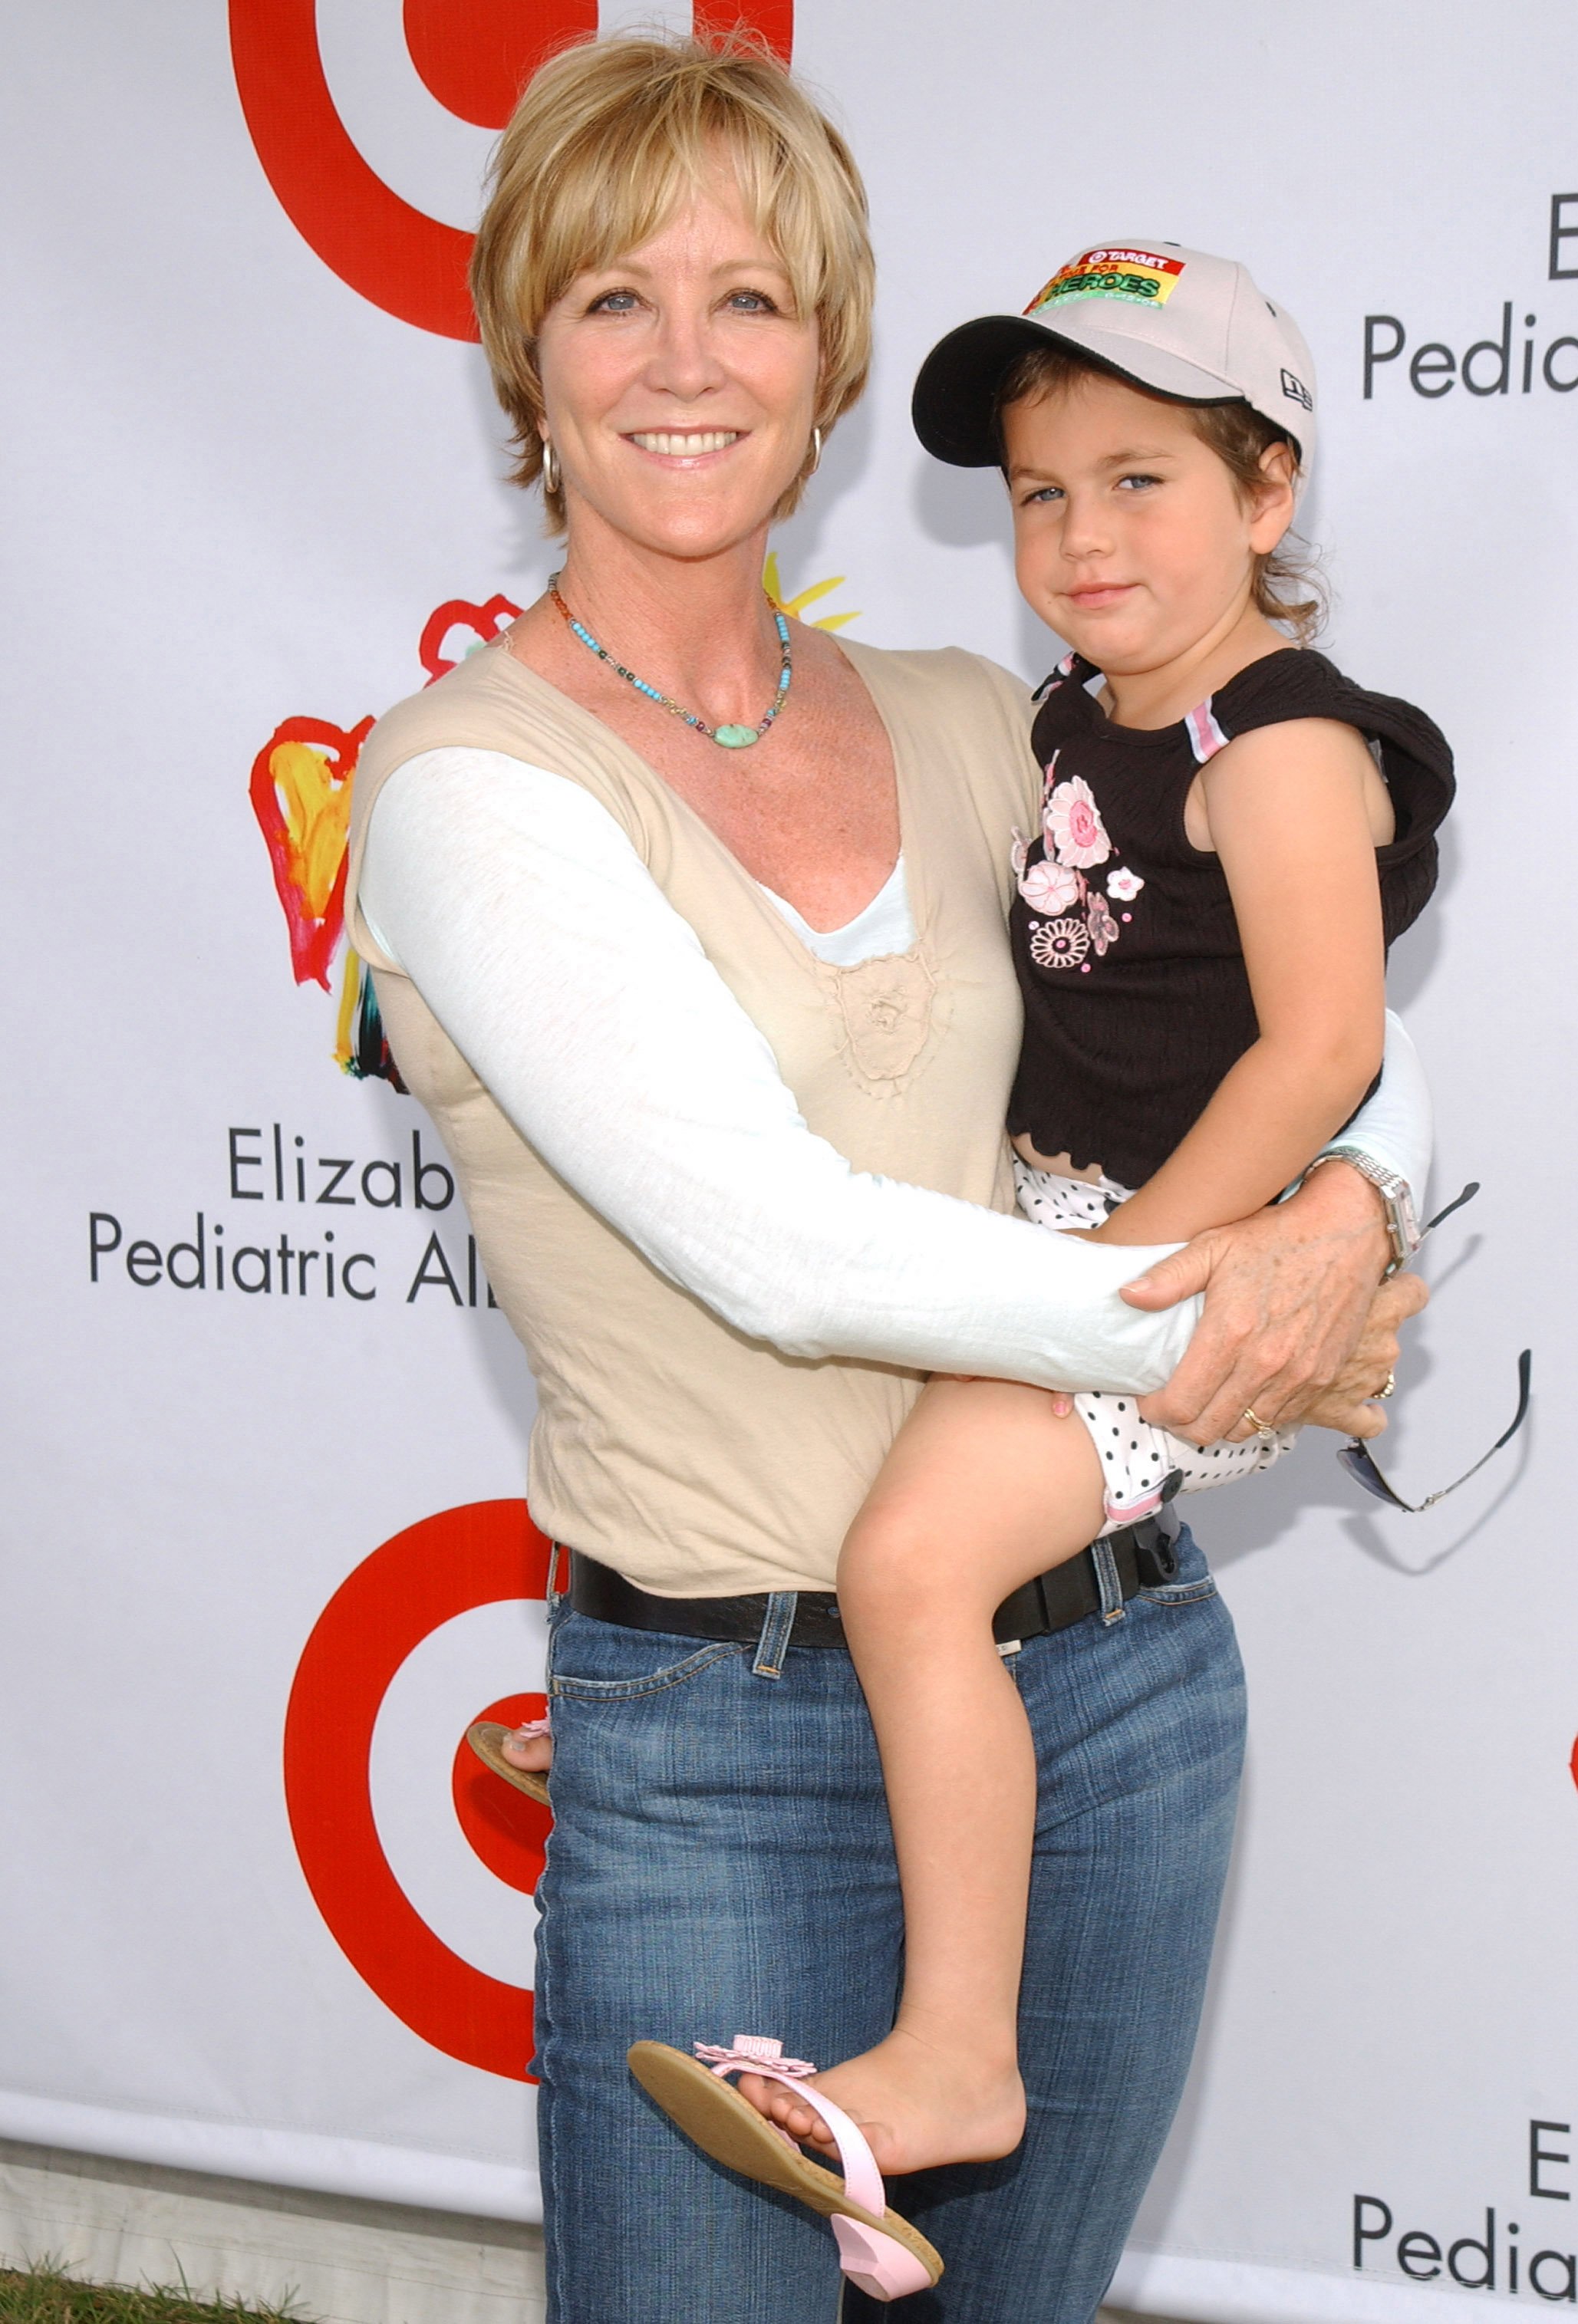 Joanna and Ashley Kerns during Elizabeth Glaser Pediatric AIDS Foundation "A Time For Heroes" Celebrity Carnival in Los Angeles, California, on June 12, 2005 | Source: Getty Images